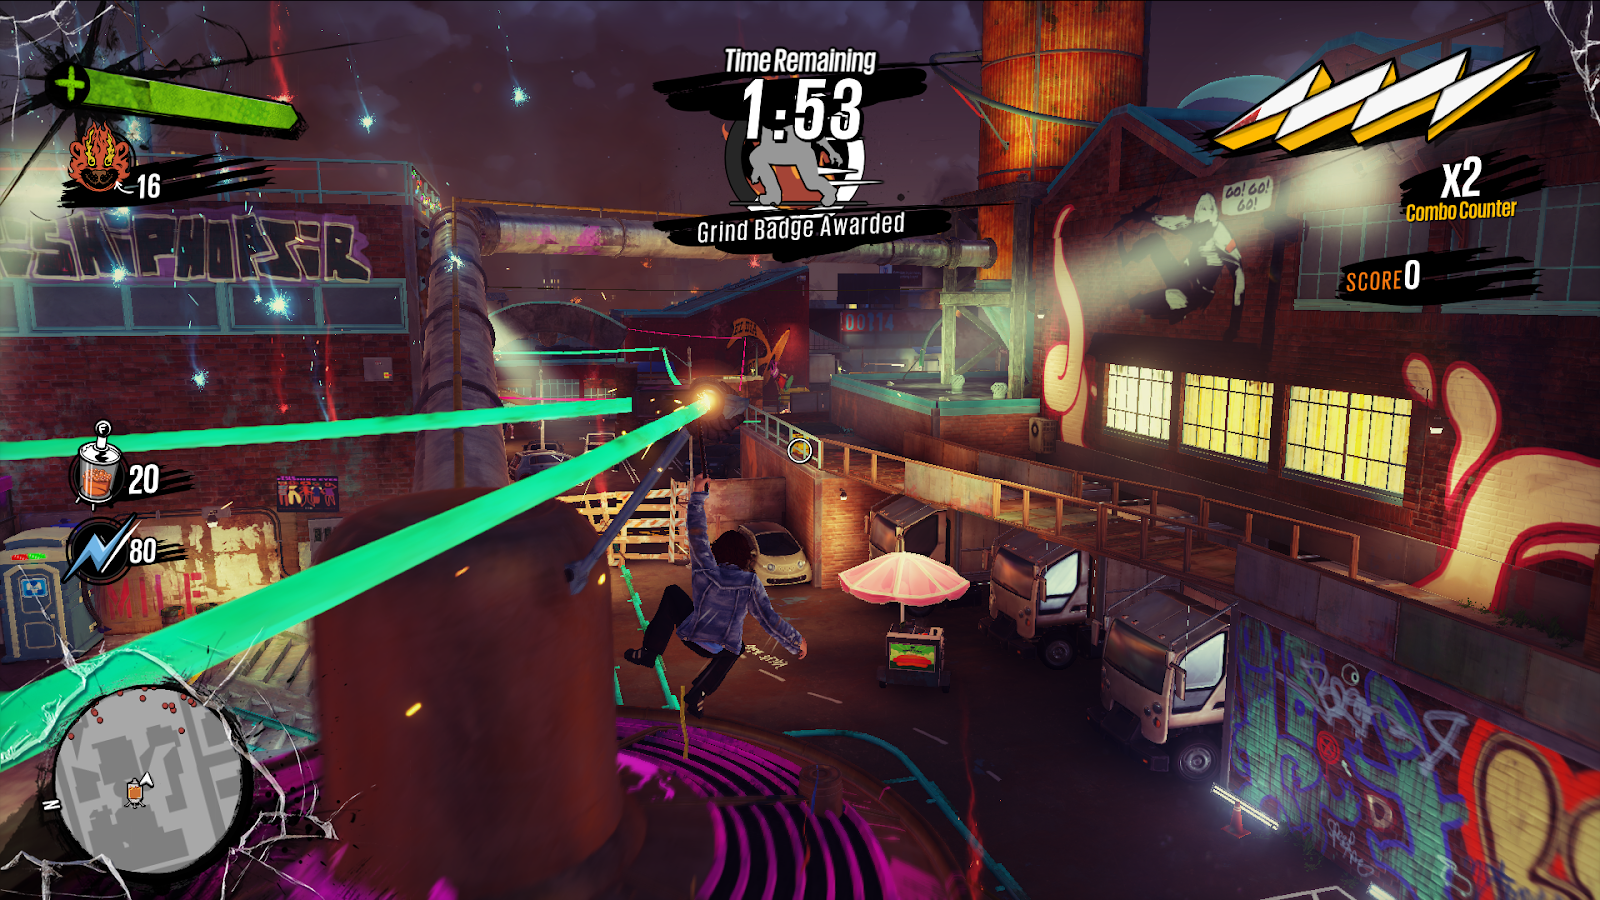 Sunset Overdrive Review: Twilight Years - Without the Sarcasm